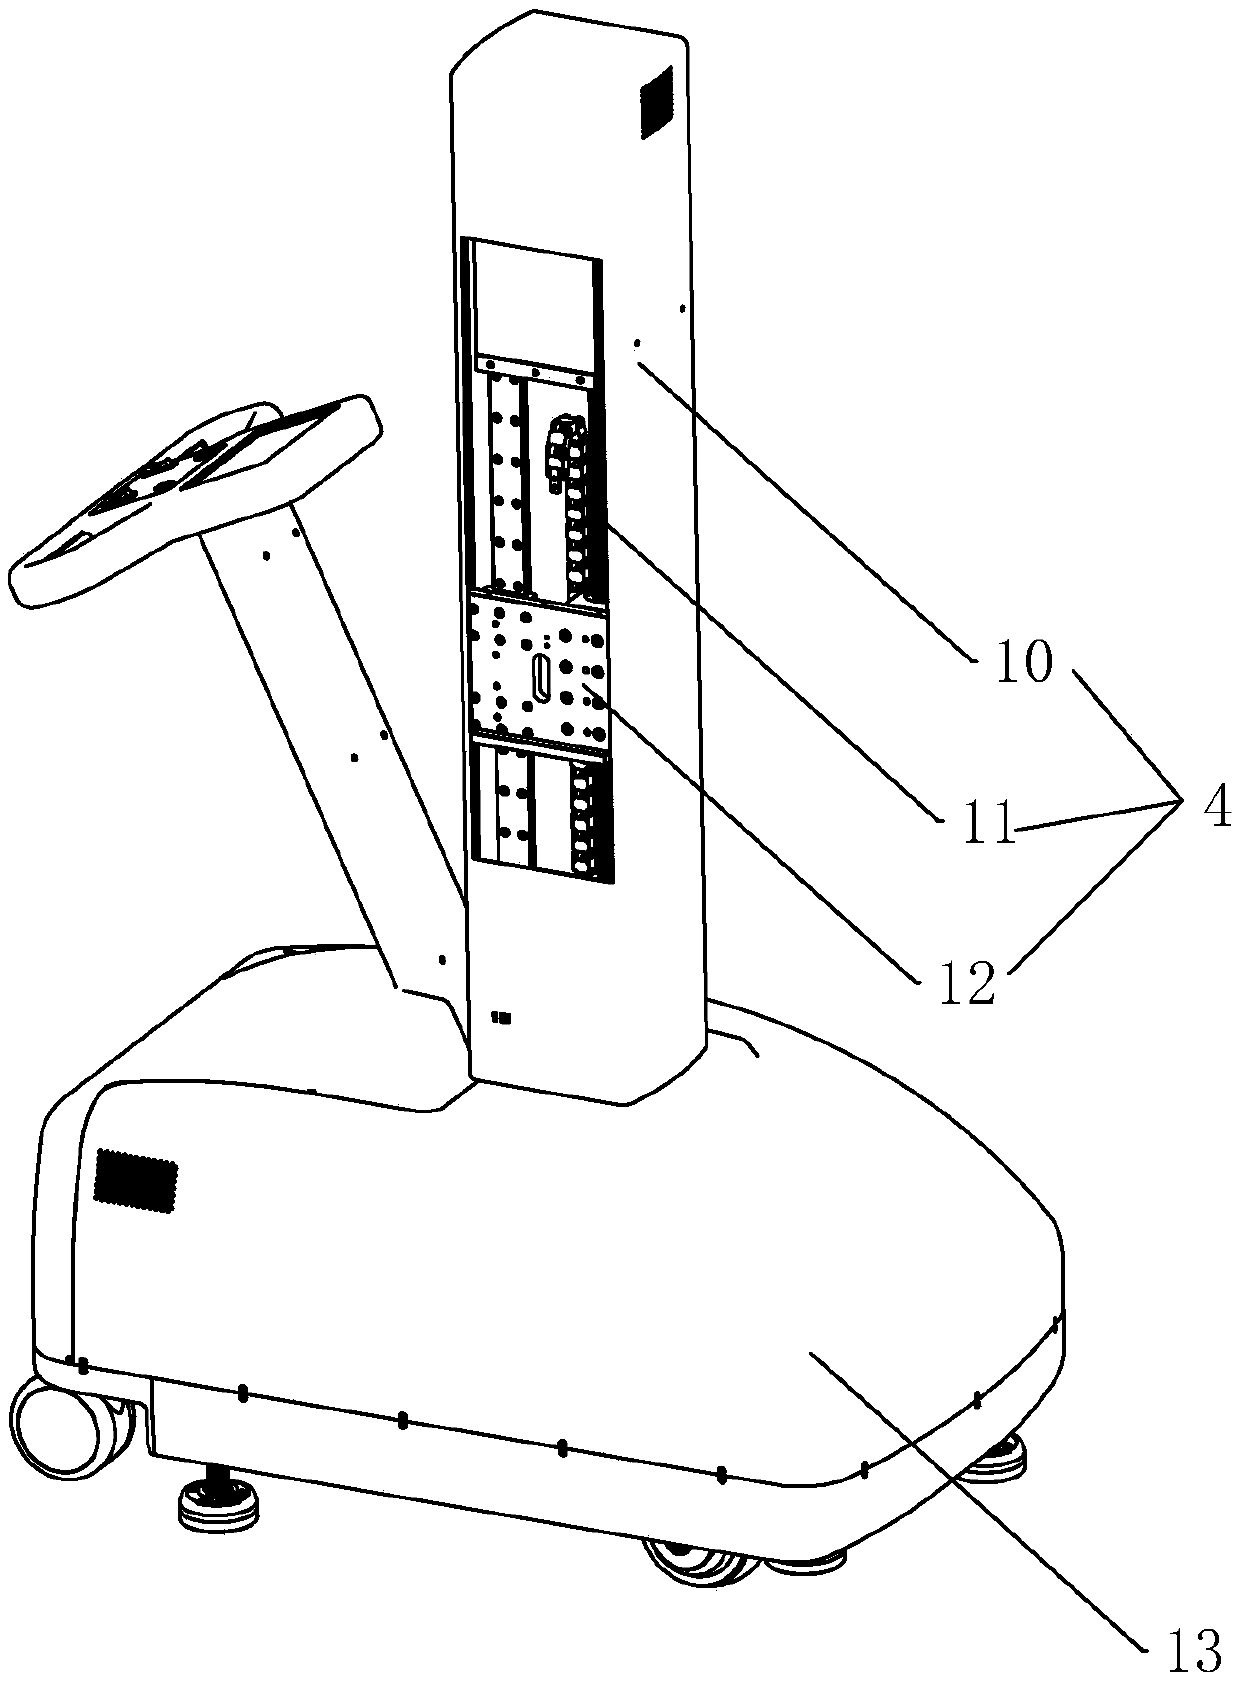 Master-slave robot system for thoracoabdominal cavity minimally invasive surgery and configuration method of system